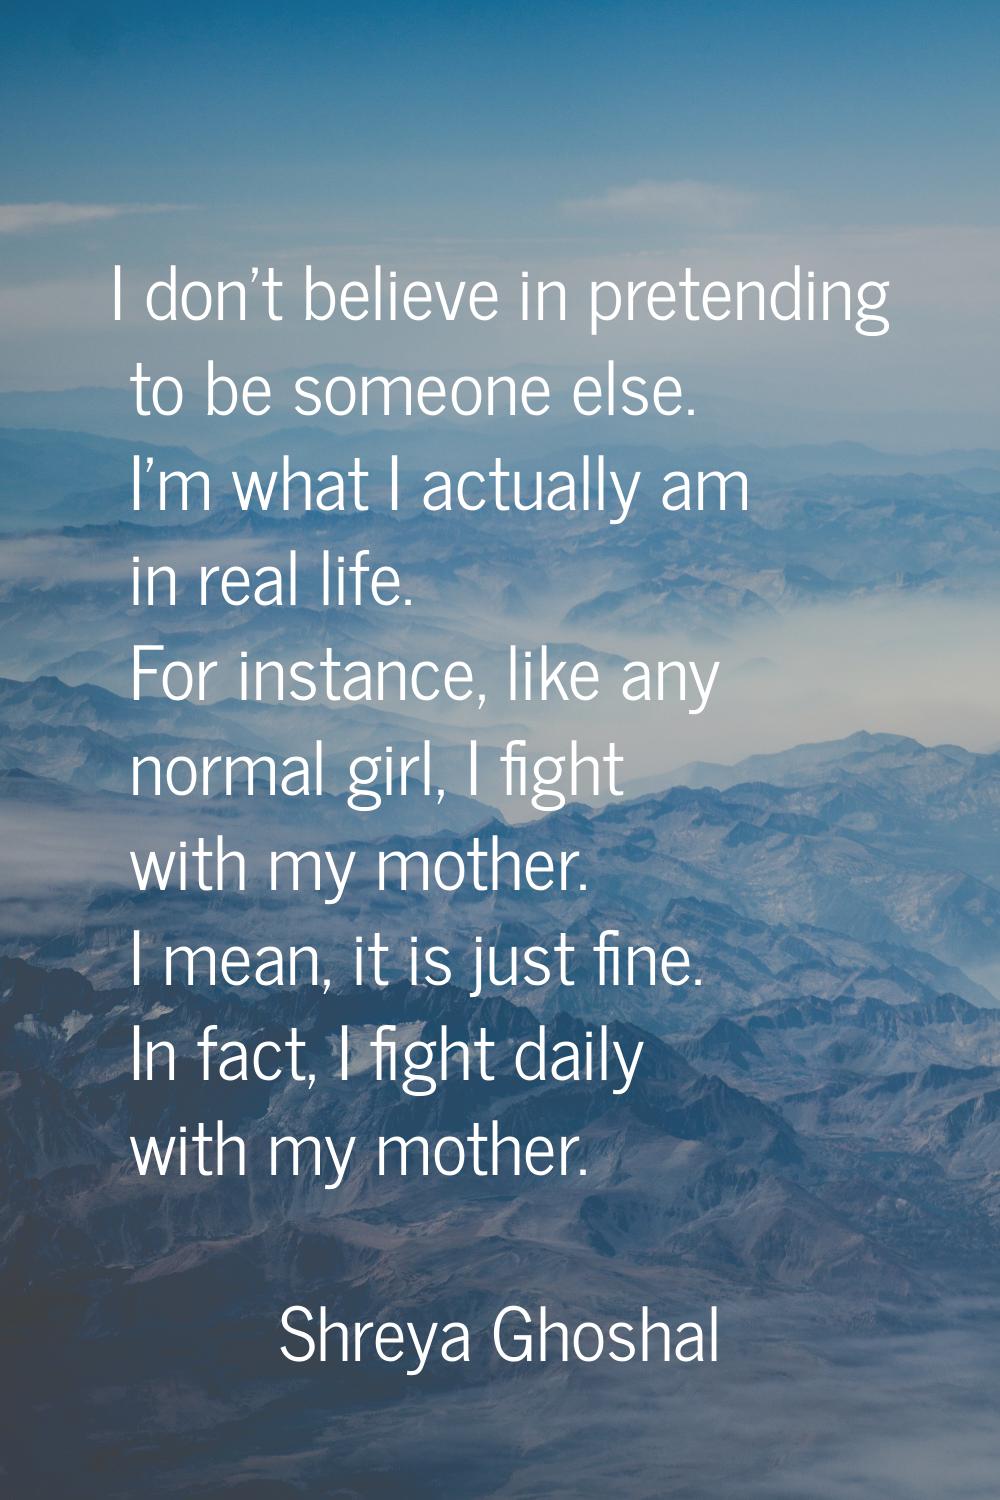 I don't believe in pretending to be someone else. I'm what I actually am in real life. For instance